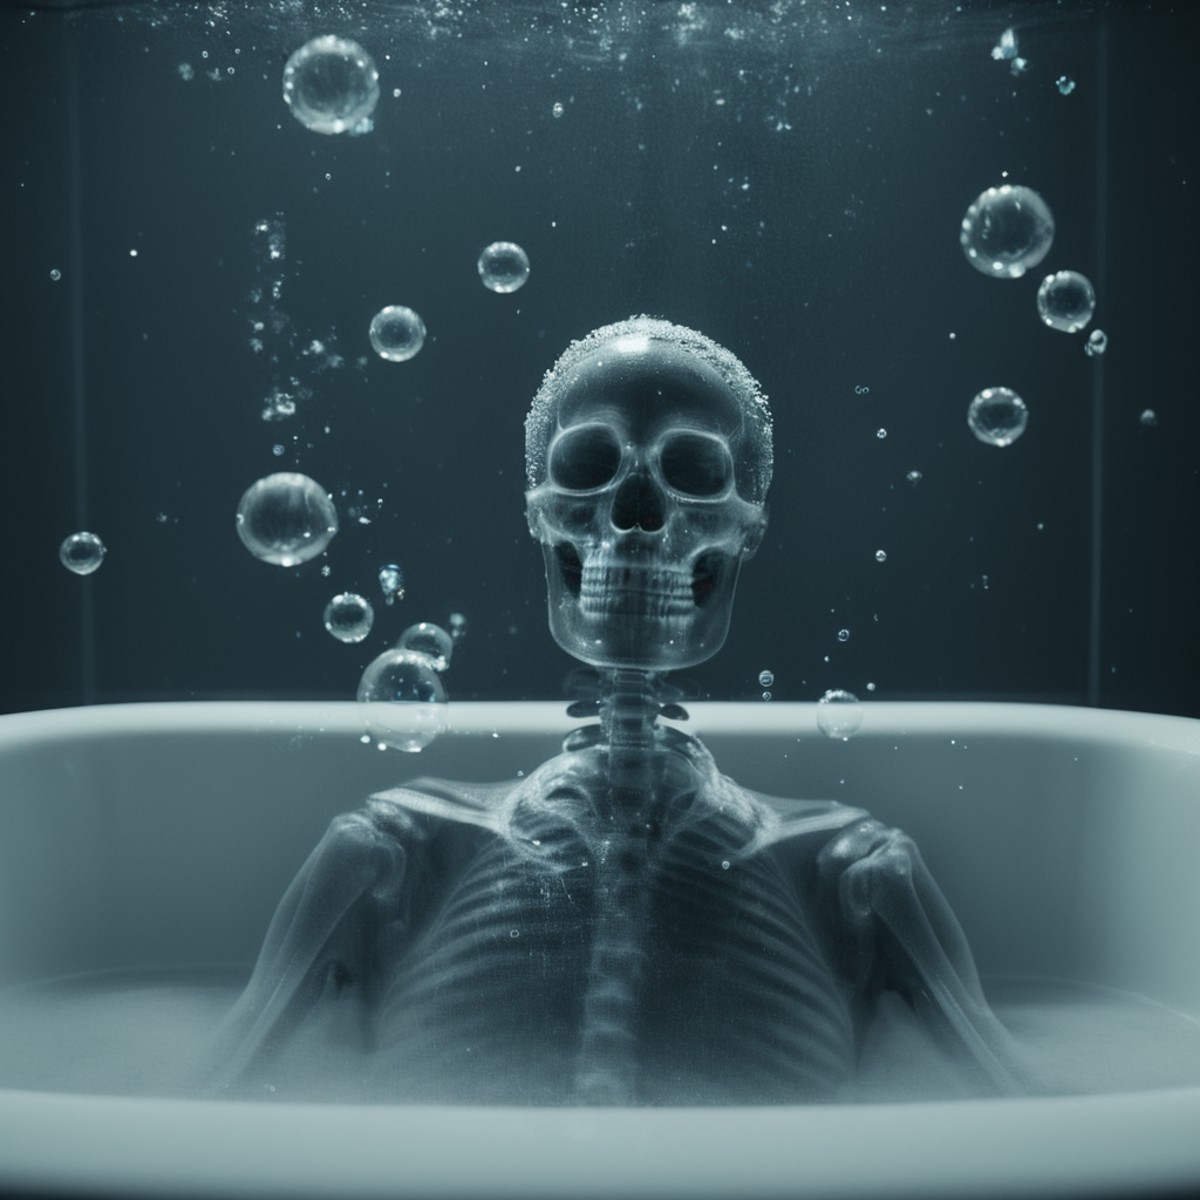 cinematic film still of  <lora:x-ray style:1> X-ray of
a skeleton in a bathtub with bubbles
,x-ray style, shallow depth of...